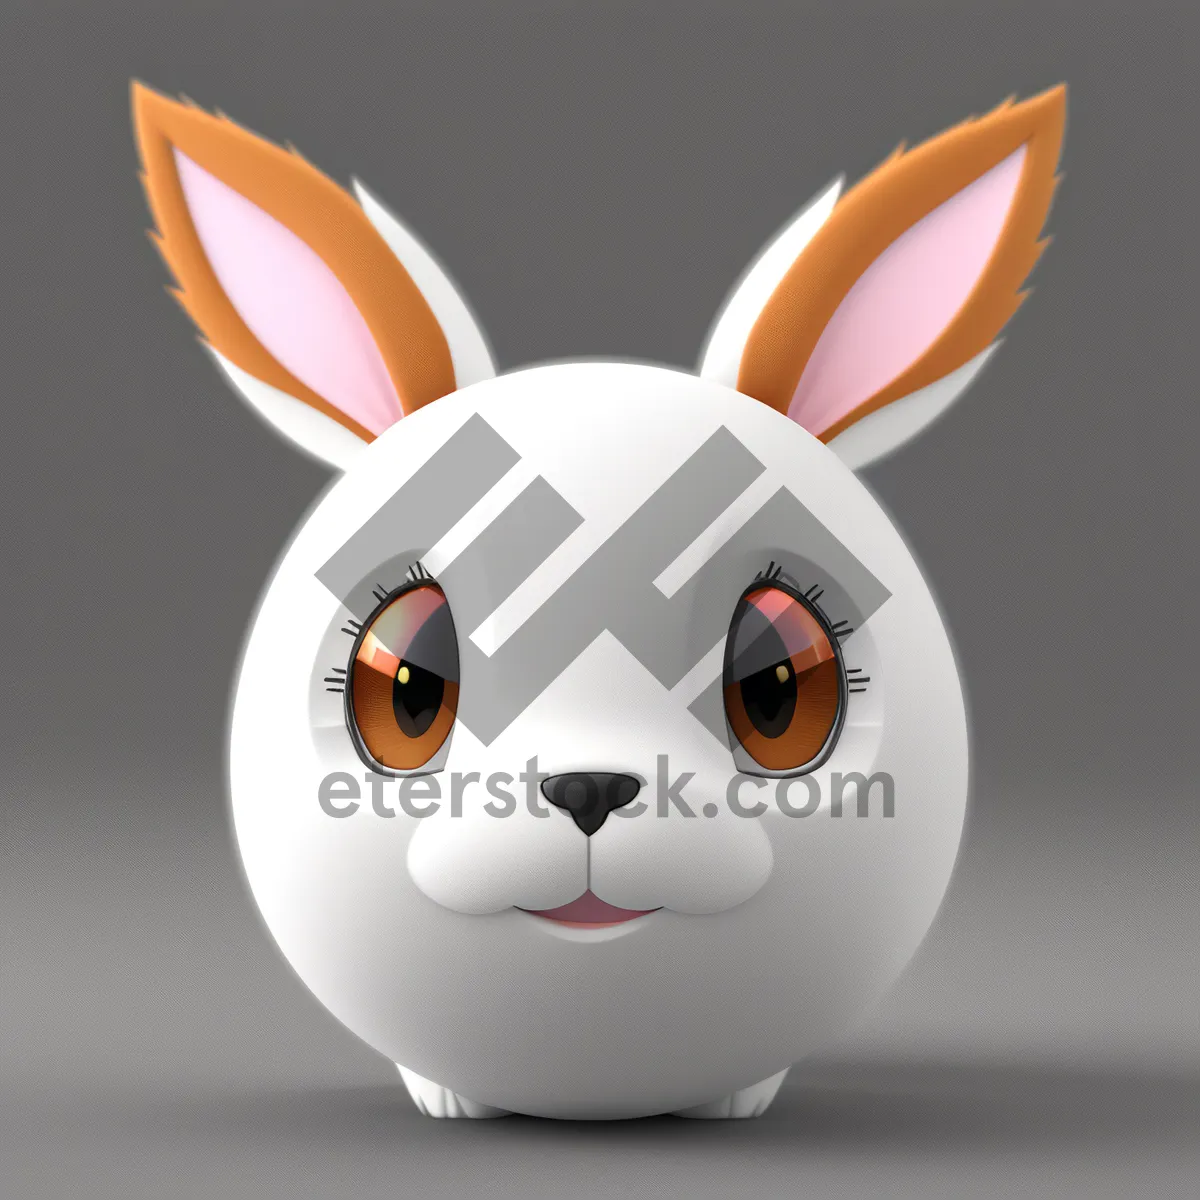 Picture of Cheerful Cartoon Bunny - Your Cute and Fun Animal Character